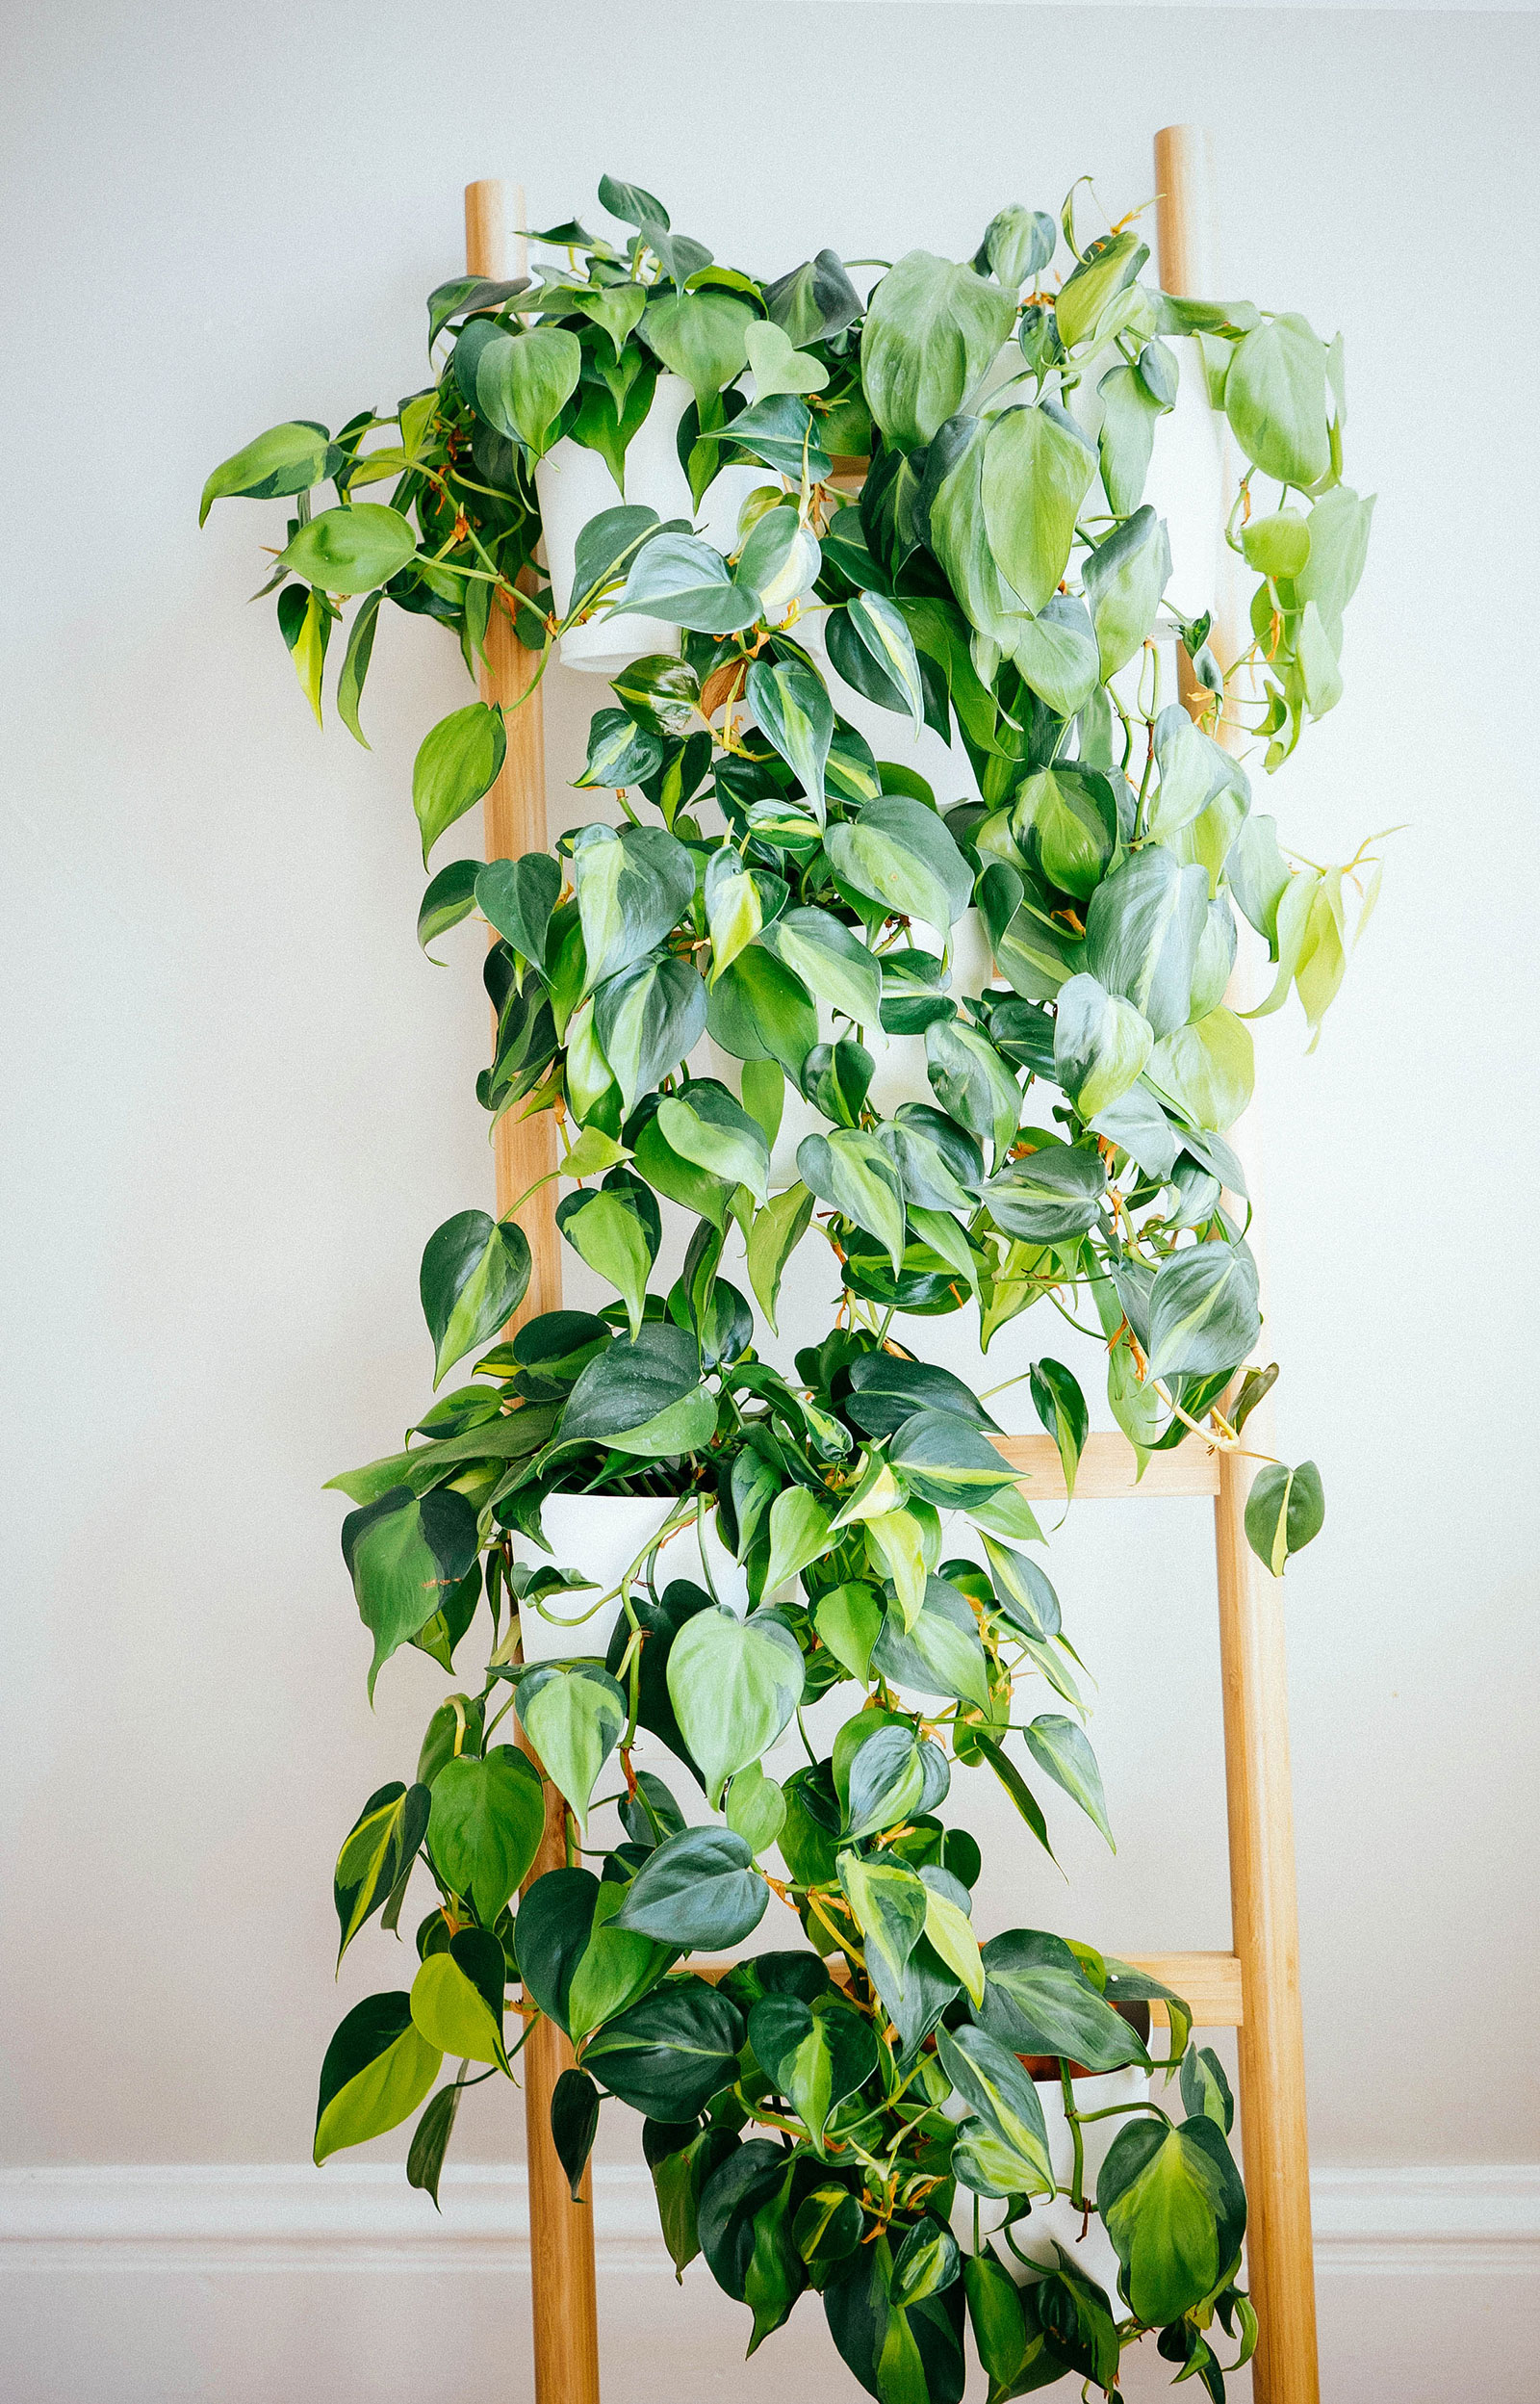 Incredible Philodendron varieties you can grow at home (shown here are Philodendron Micans houseplants displayed on a wooden ladder)